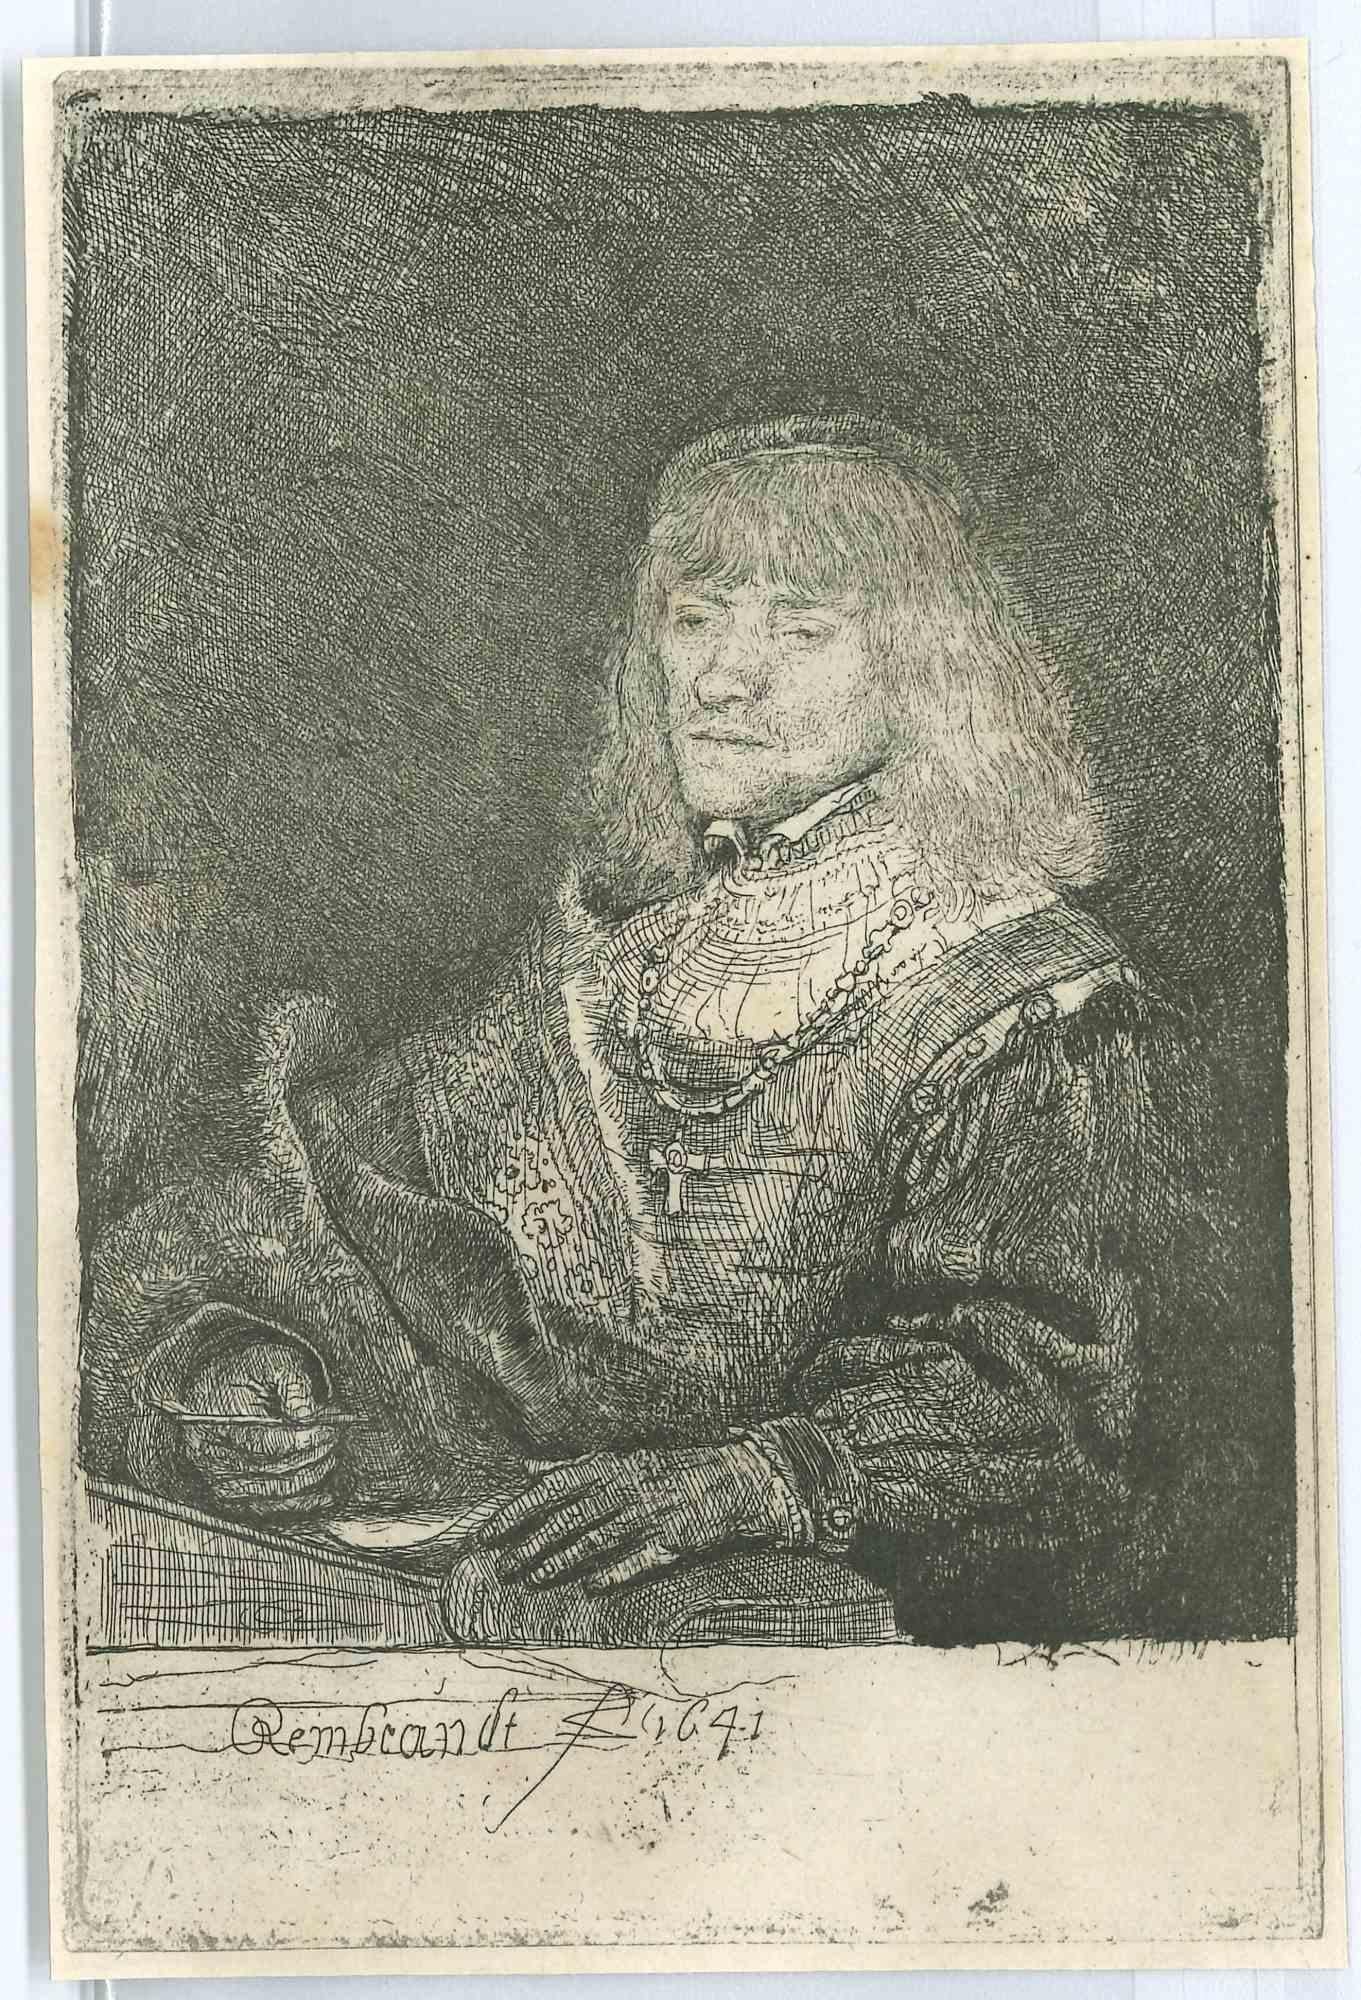 Man at Desk, Wearing Cross - Engraving after Rembrandt - 19th Century